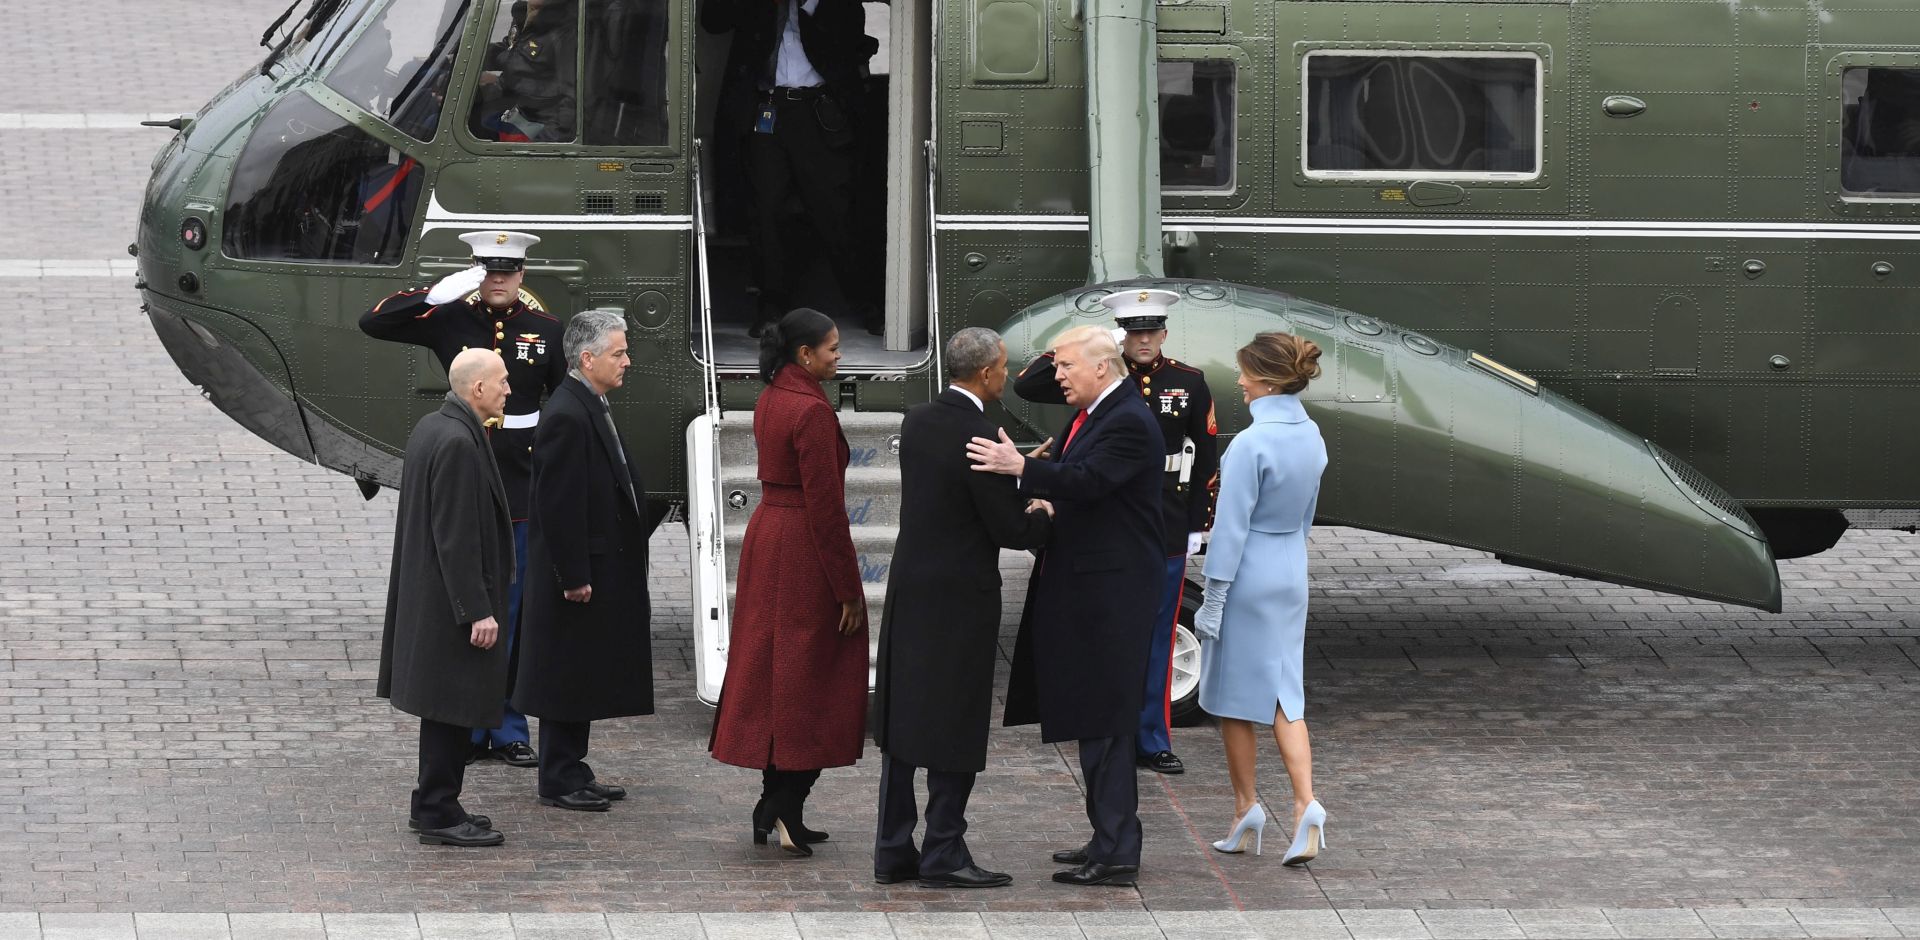 epa05736040 Former US president Barack Obama (2-L) and Michelle Obama (L) bid farewll to President Donald Trump (2-R) and Melania Trump (R), in front of Marine One on the East front as Obama departs from the 2017 Presidential Inauguration at the US Capitol, in Washington, DC, USA, 20 January 2017. Trump won the 08 November 2016 election to become the next US President.  EPA/JACK GRUBER / POOL